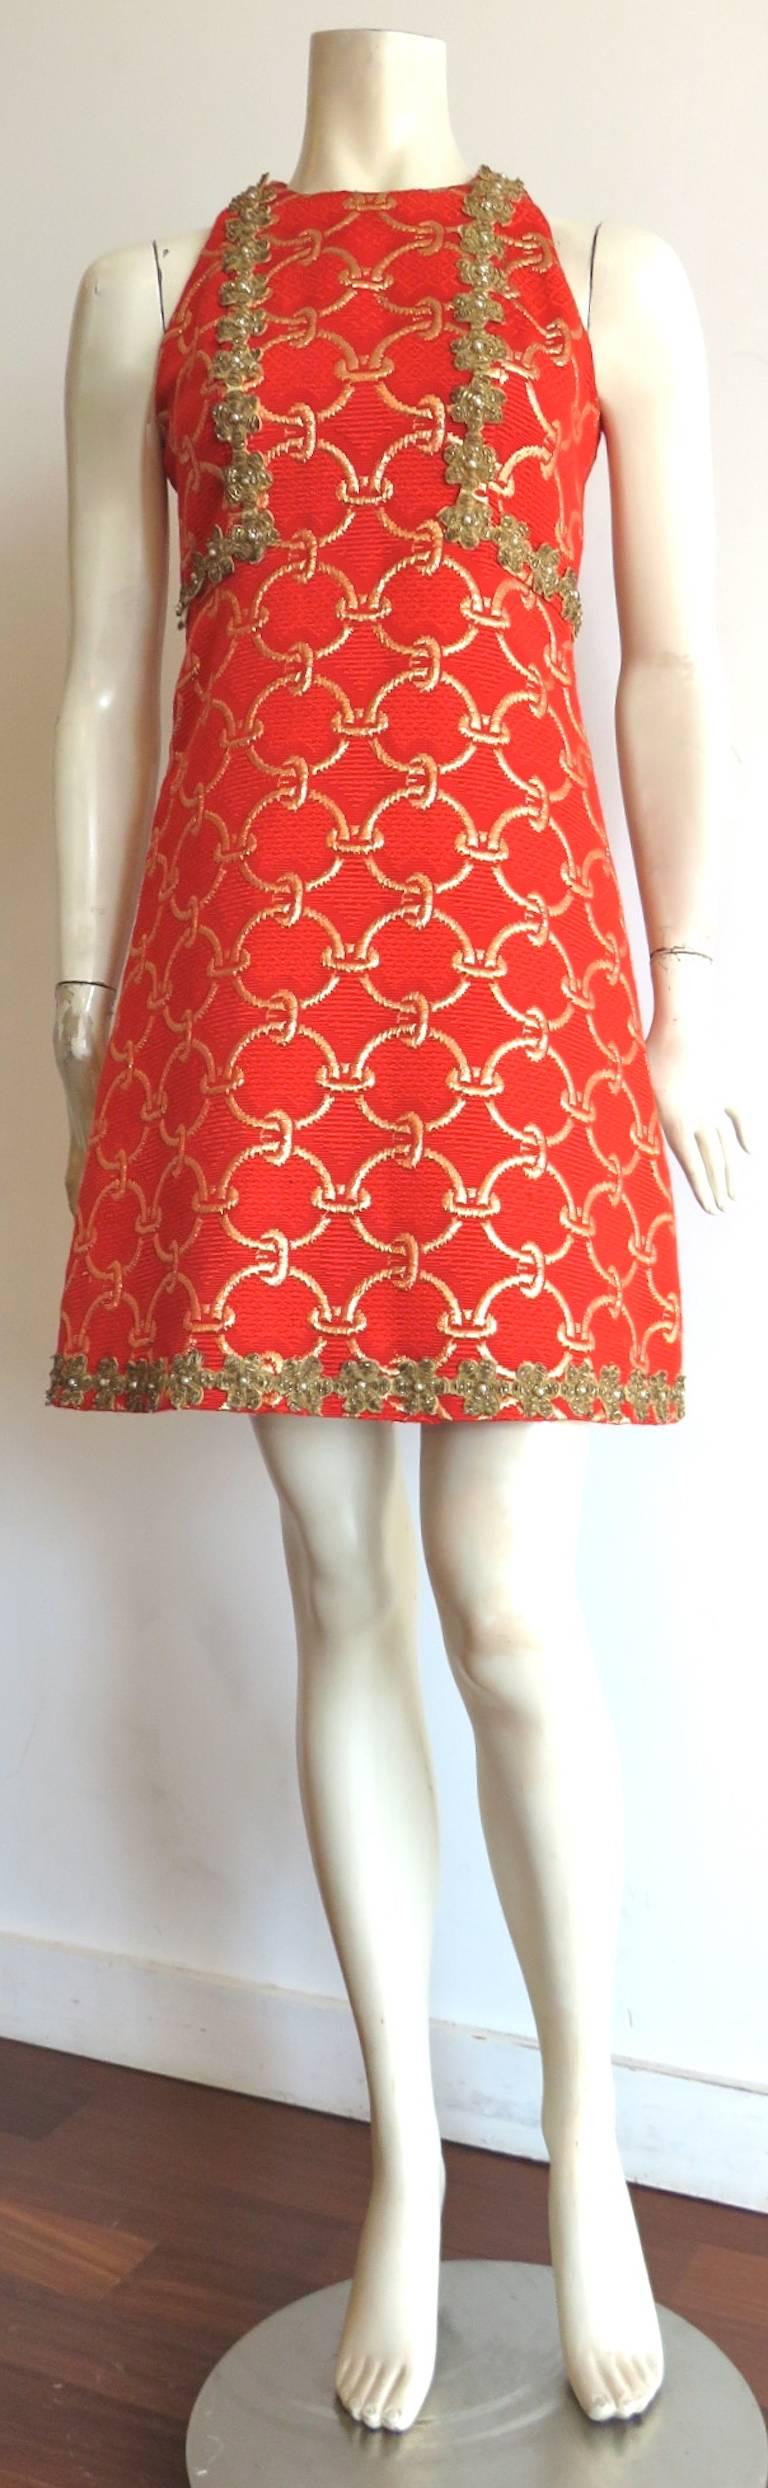 Gorgeous, early 1960's OSCAR DE LA RENTA Embellished brocade cocktail dress.

Thick, brocade tapestry weave fabrication featuring metallic gold, ring chain artwork atop 'poppy' (dark orange/red tone) ground.

Metal bullion floral embellishments